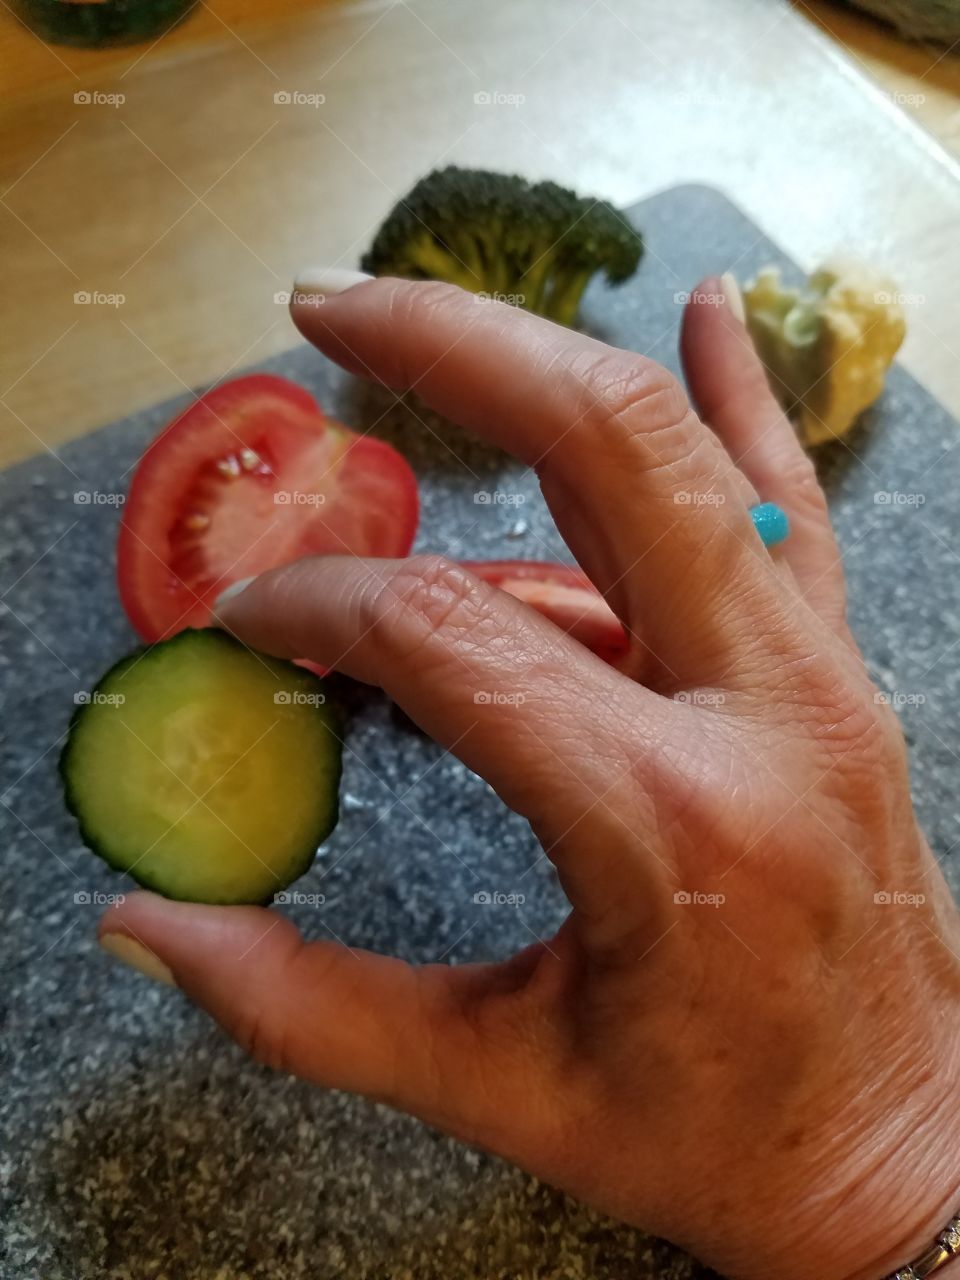 Holding food A ok cucumber and tomato